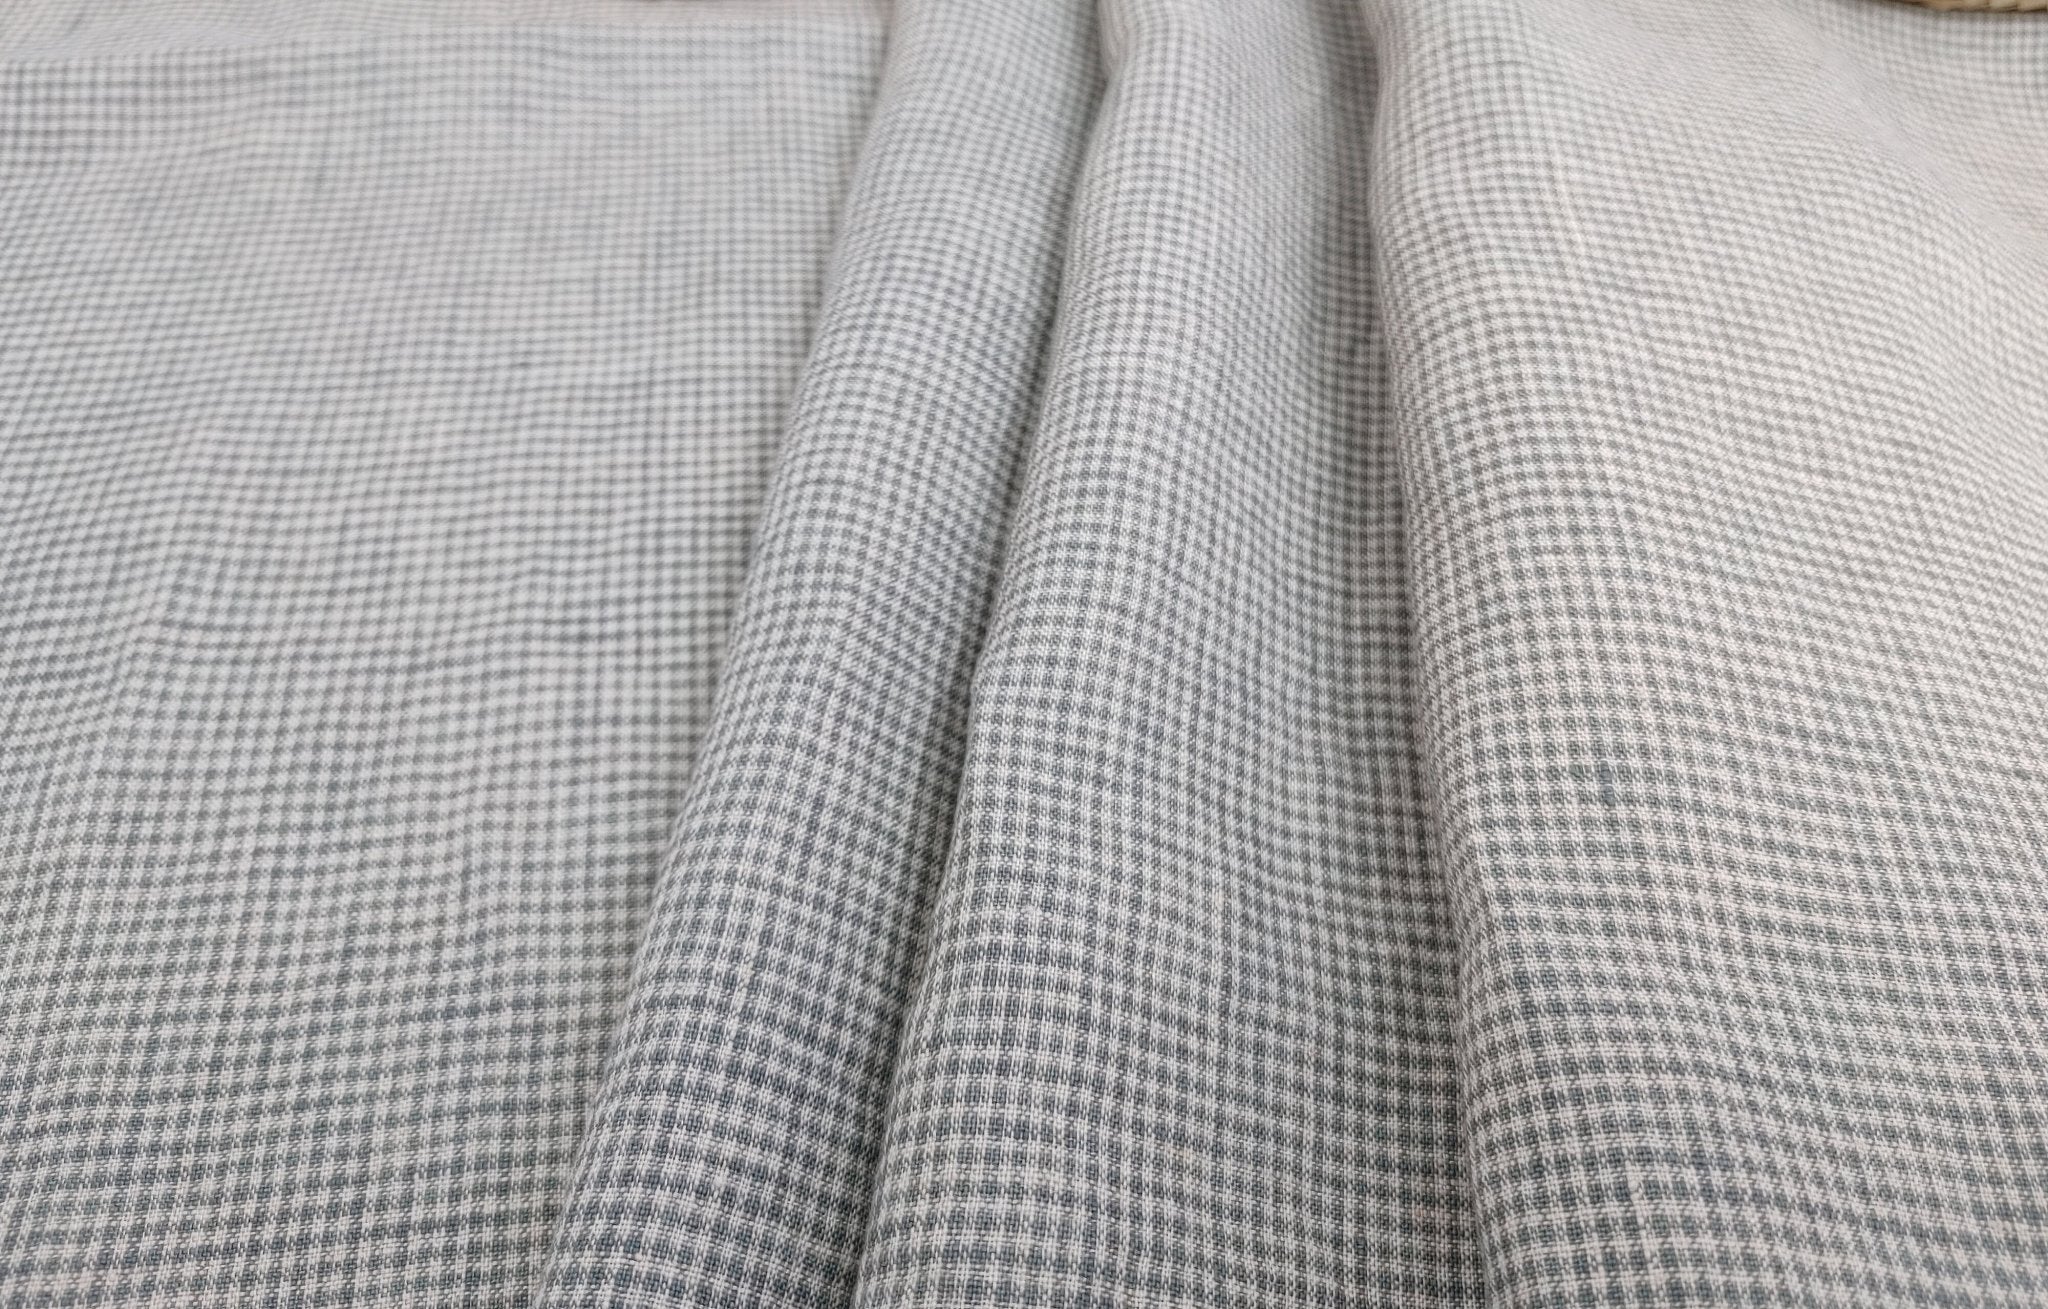 Classic Charm: 100% Linen Mini Gingham Check Fabric, Light Weight 6833 - The Linen Lab - Green